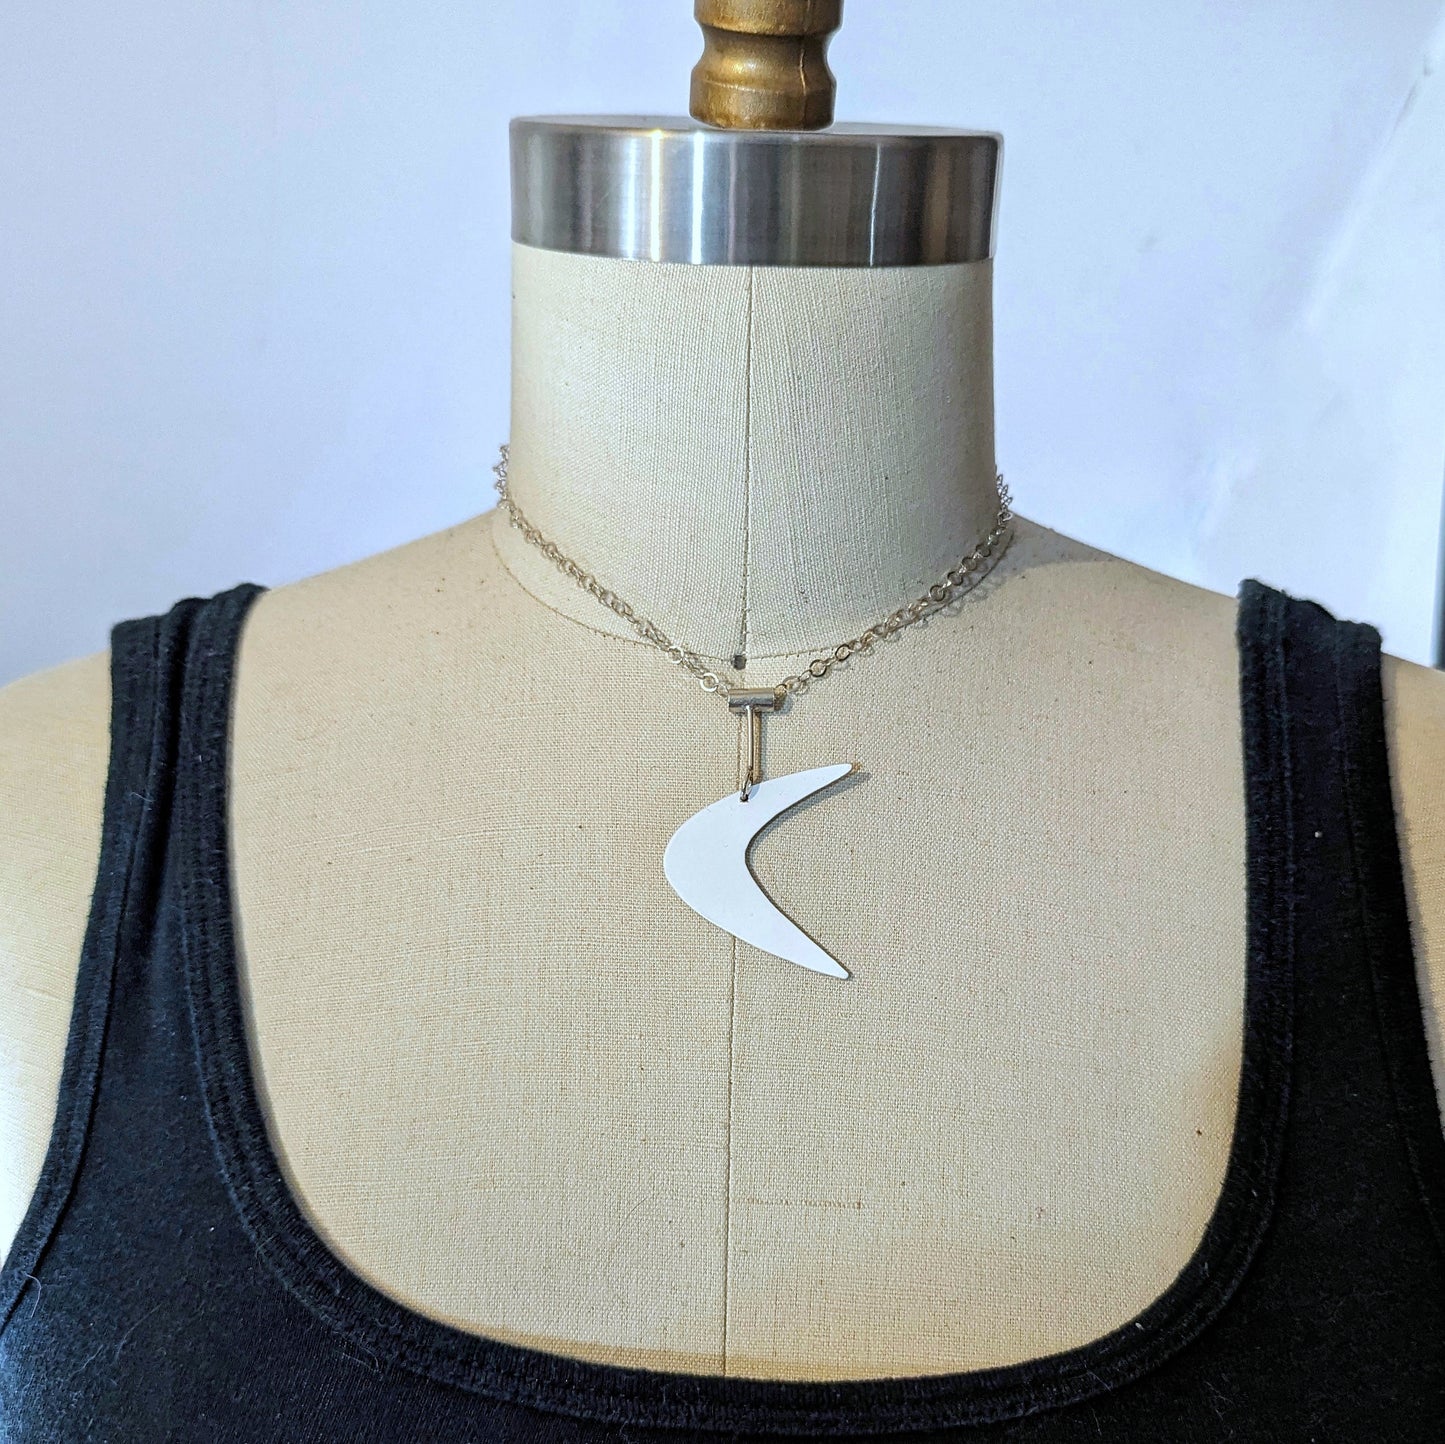 Powdercoated Boomerang Necklace- White